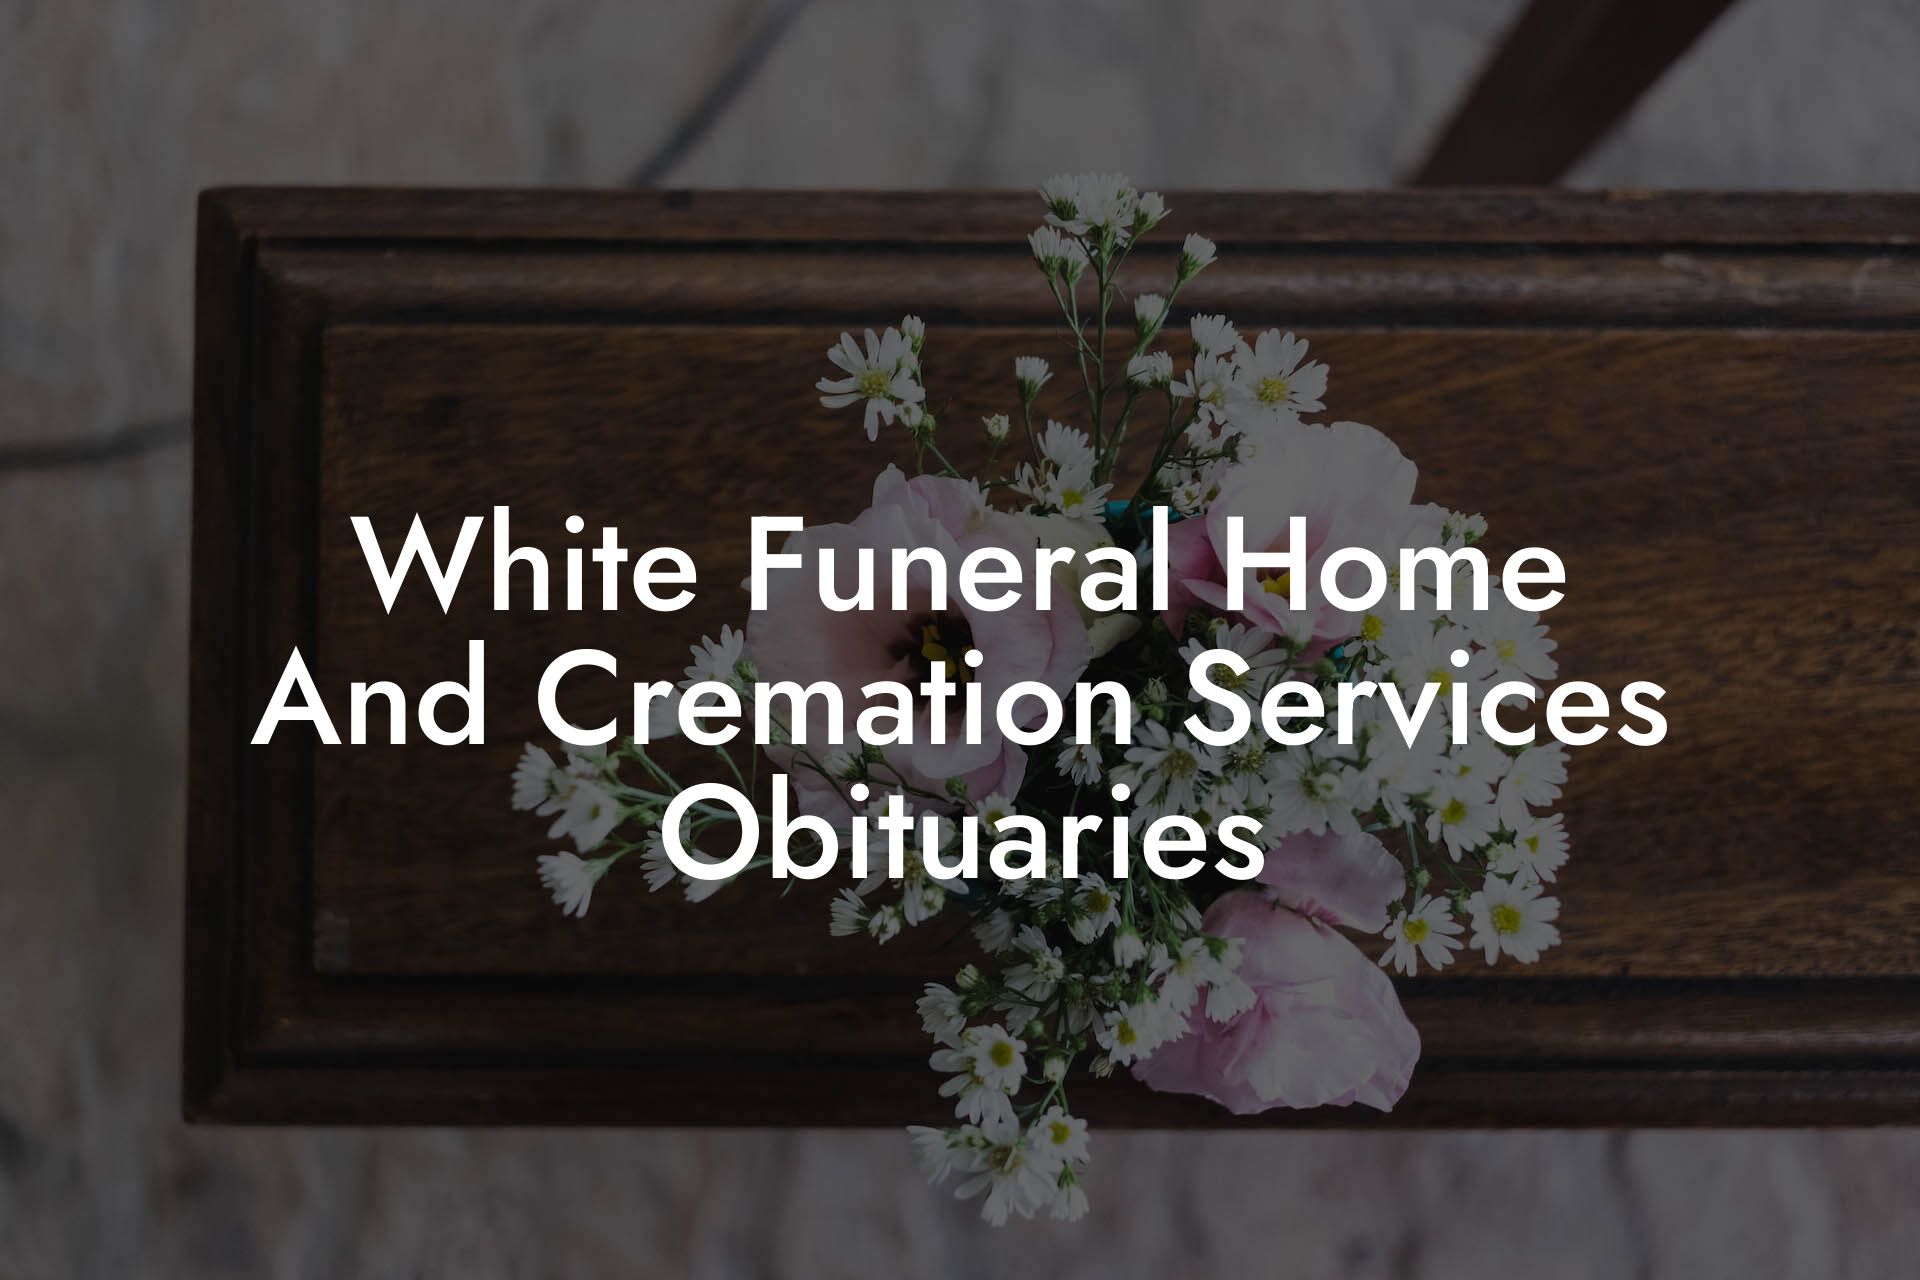 White Funeral Home and Cremation Services Obituaries